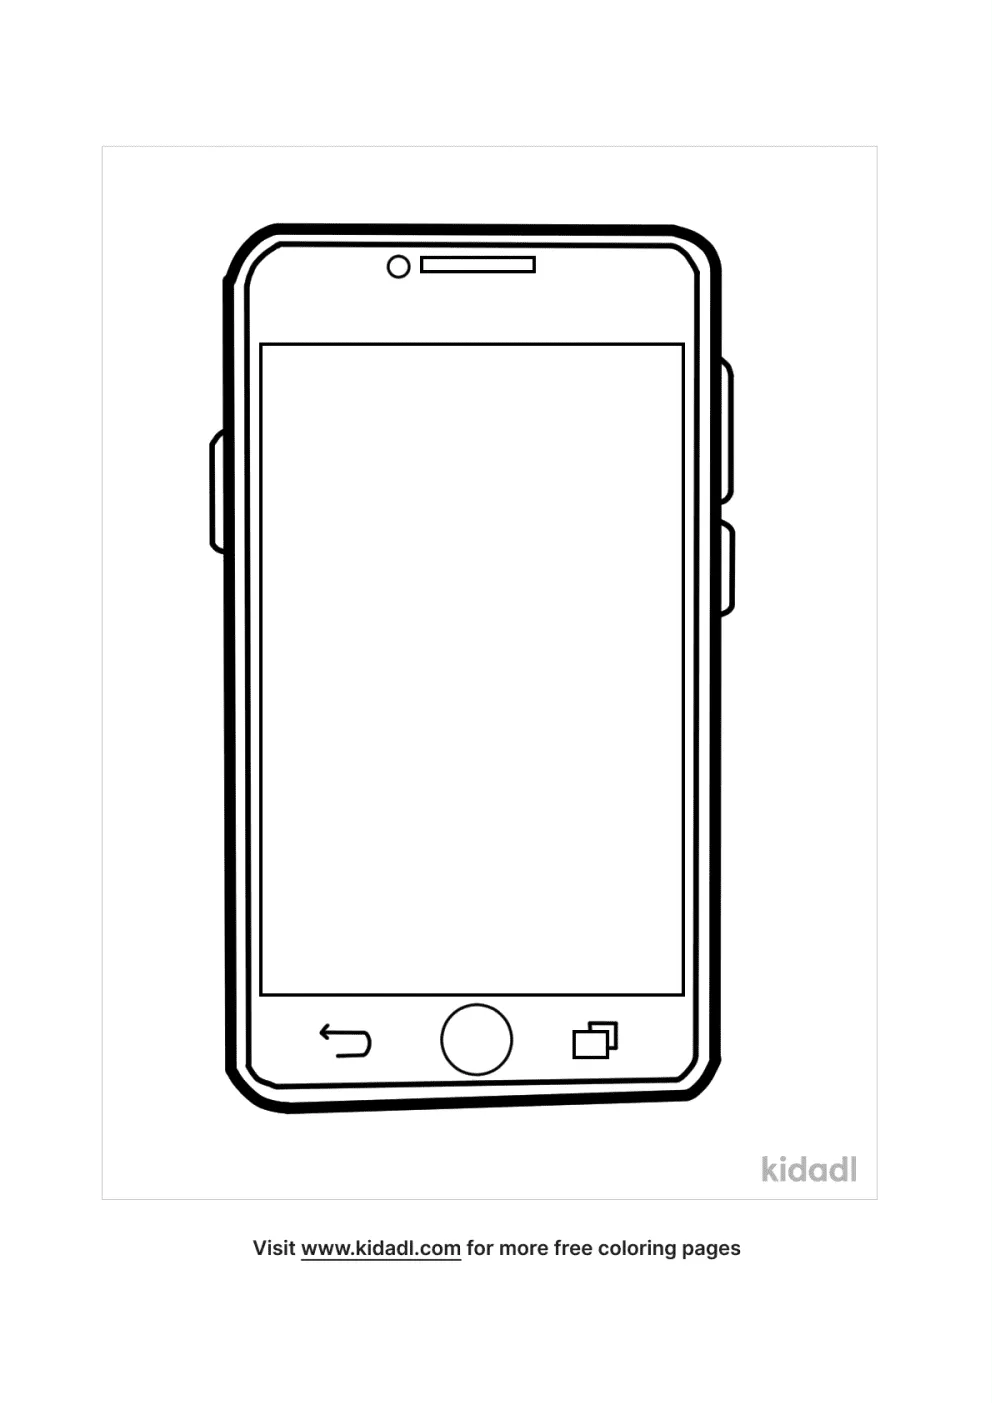 Phone Coloring Pages   Free Home Coloring Pages   Kidadl